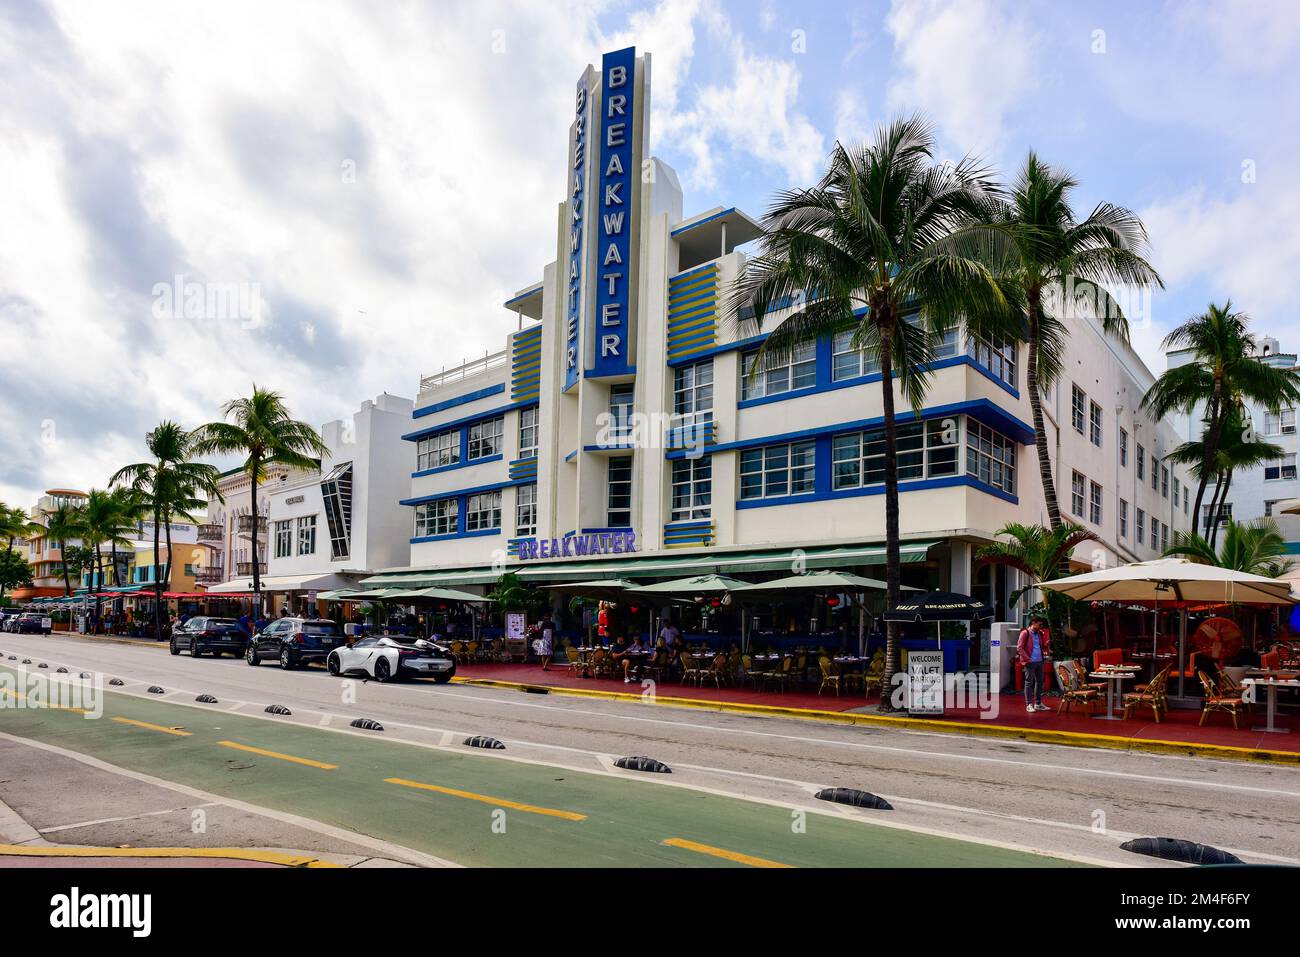 Street scene in front of the Breakwater Hotel, a historic Art Deco in South Beach, Miami, Florida. Stock Photo